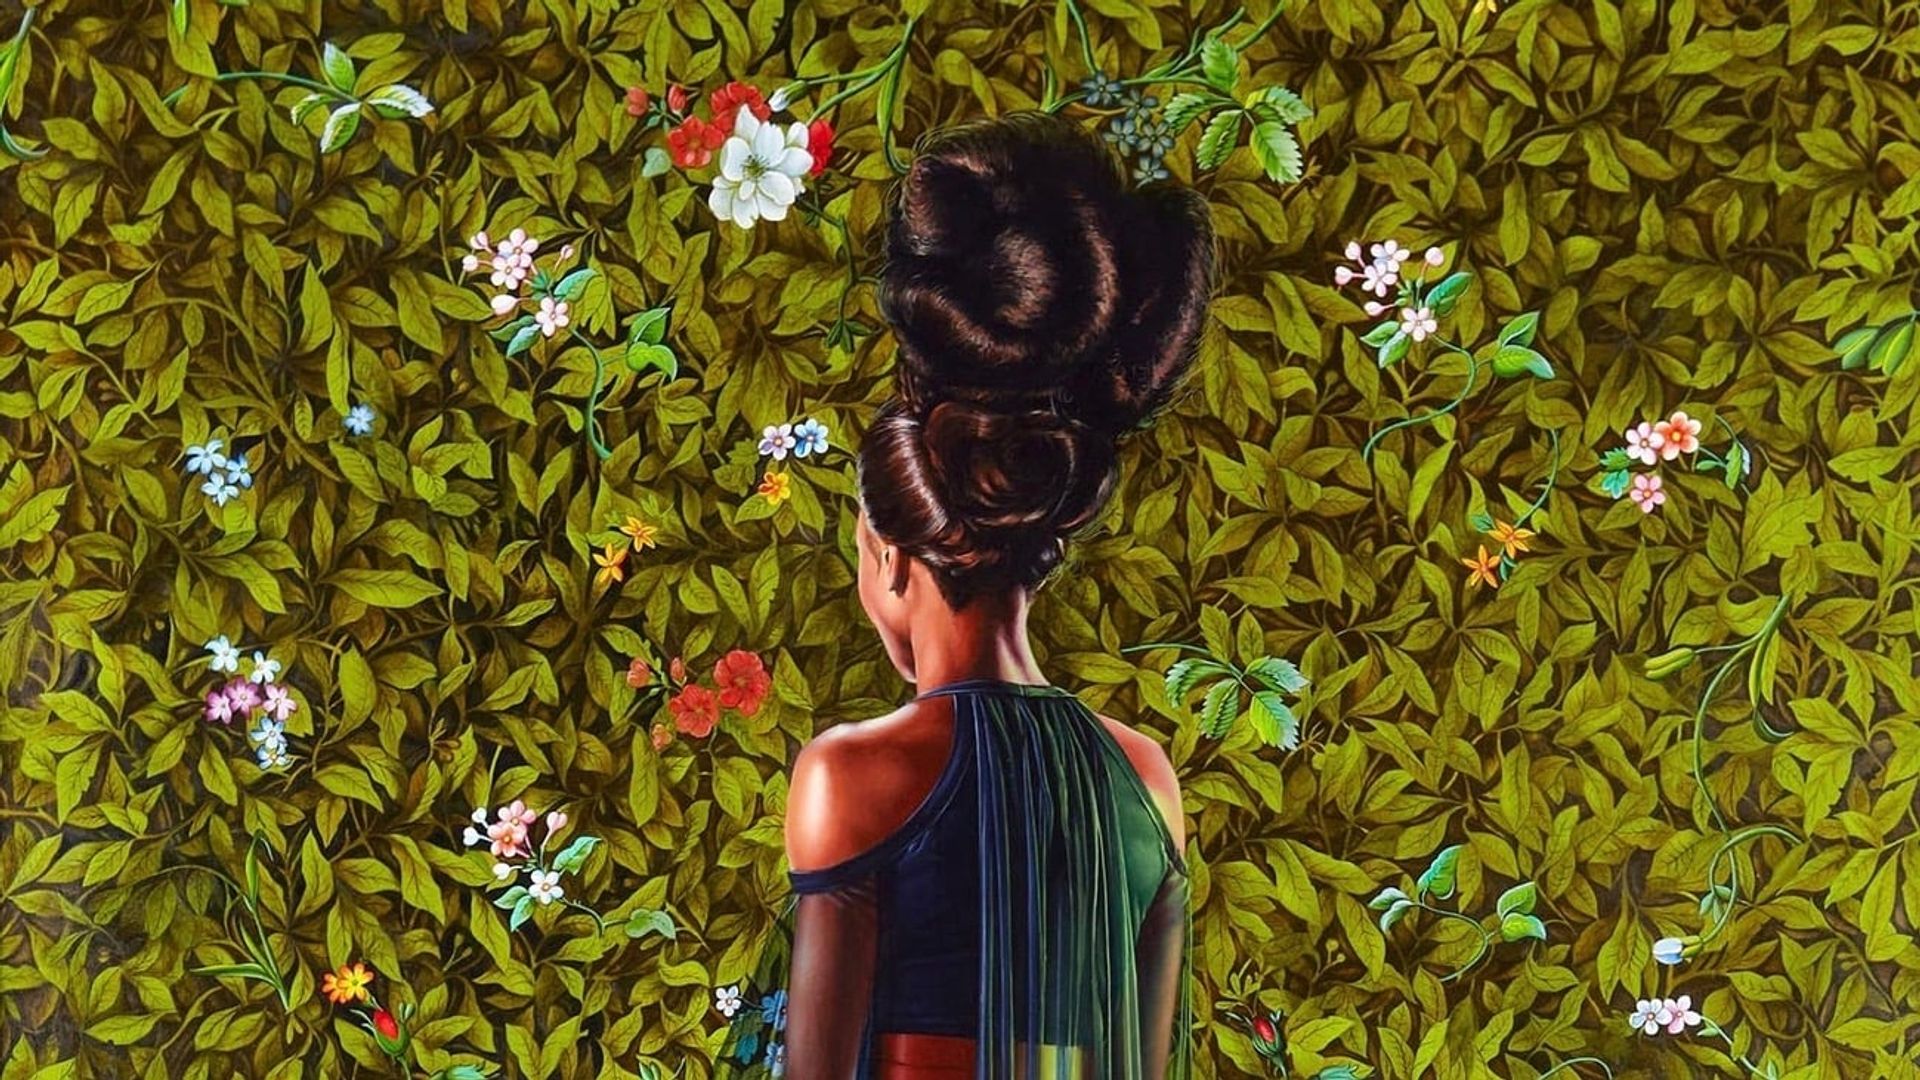 Kehinde Wiley: An Economy of Grace background